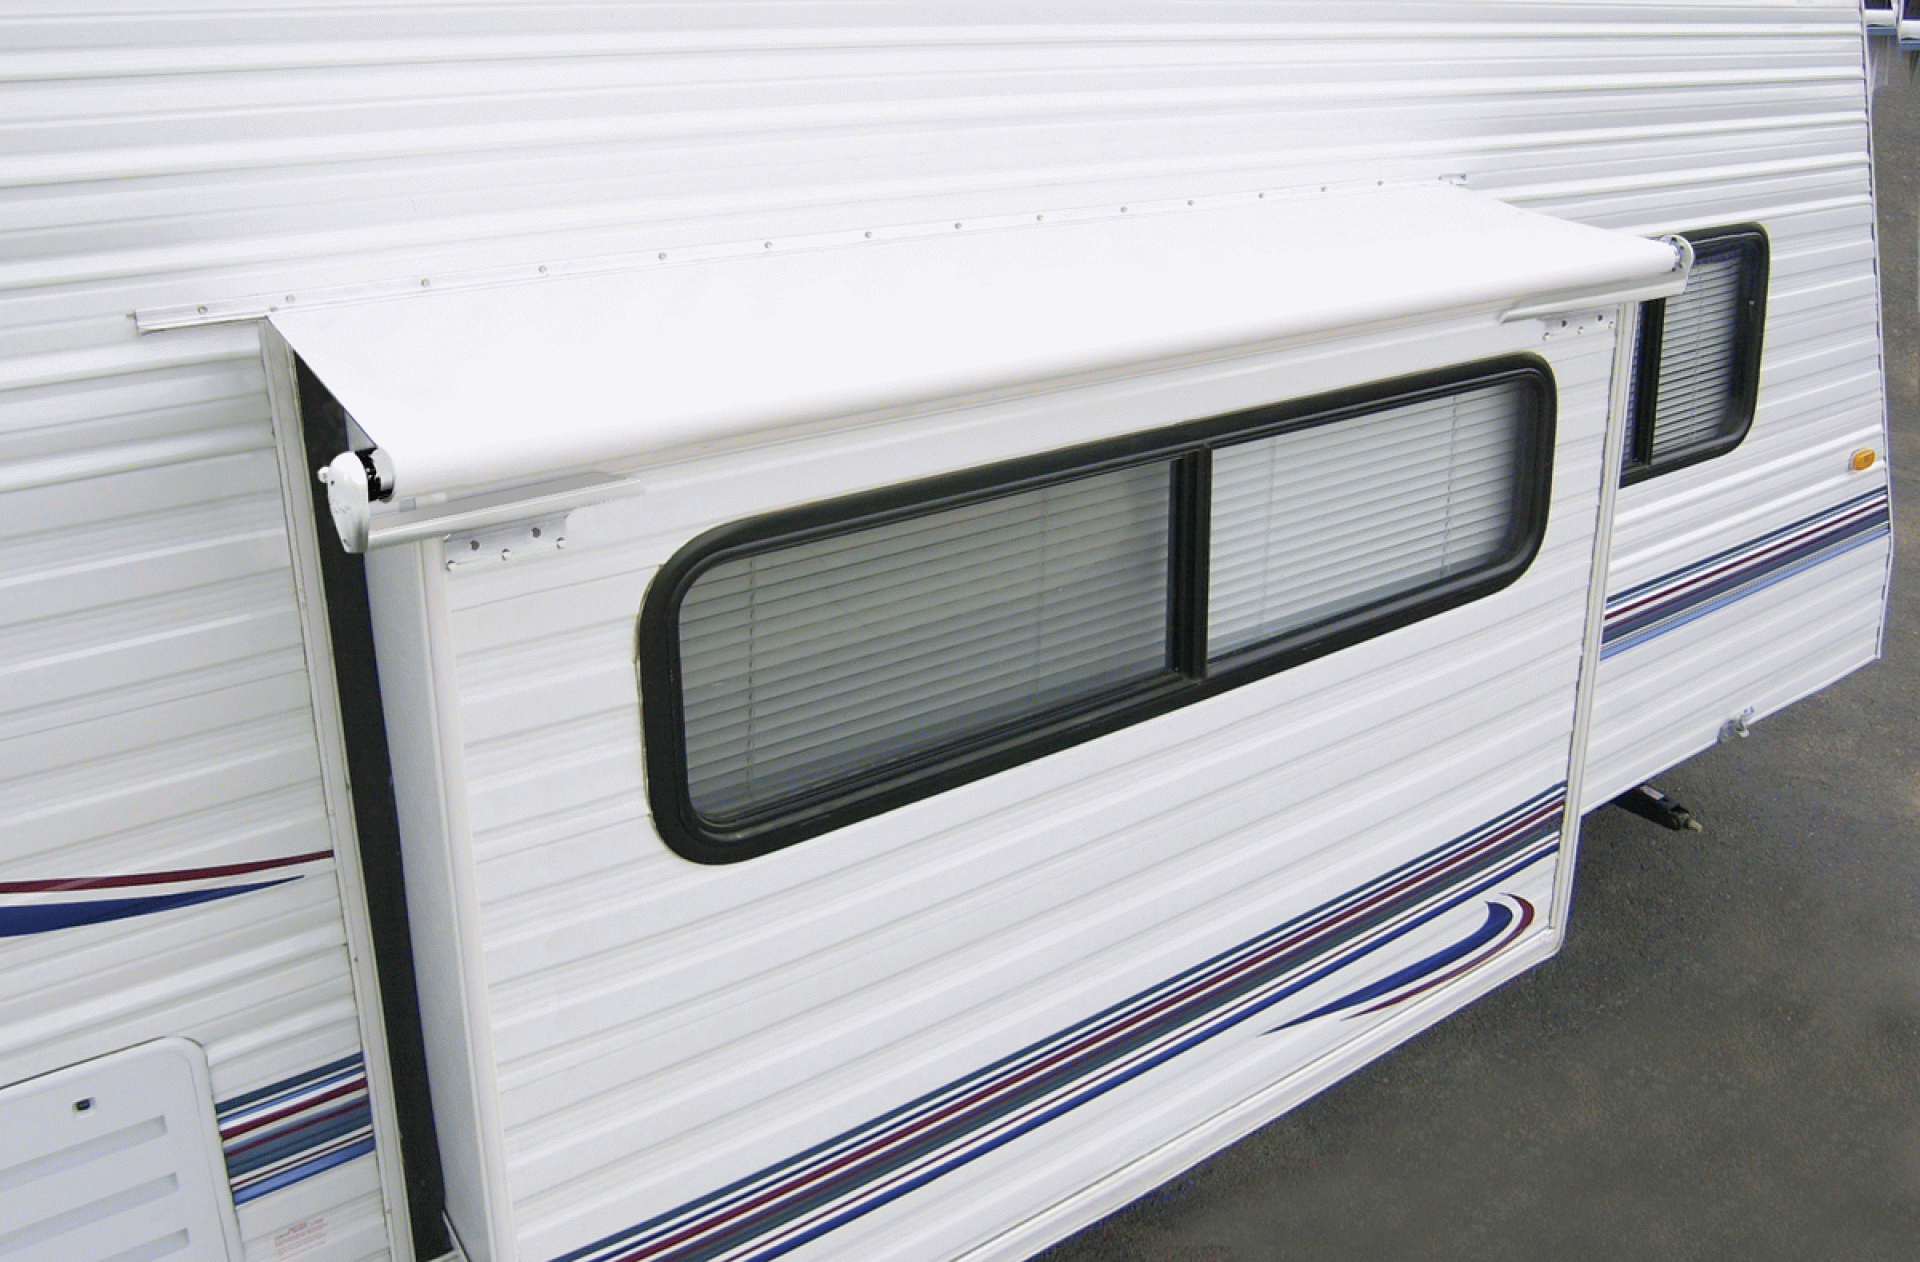 CAREFREE OF COLORADO | LH1856242 | Slideout Cover Awning 178" - 185.9" Roof Range Solid Black Vinyl